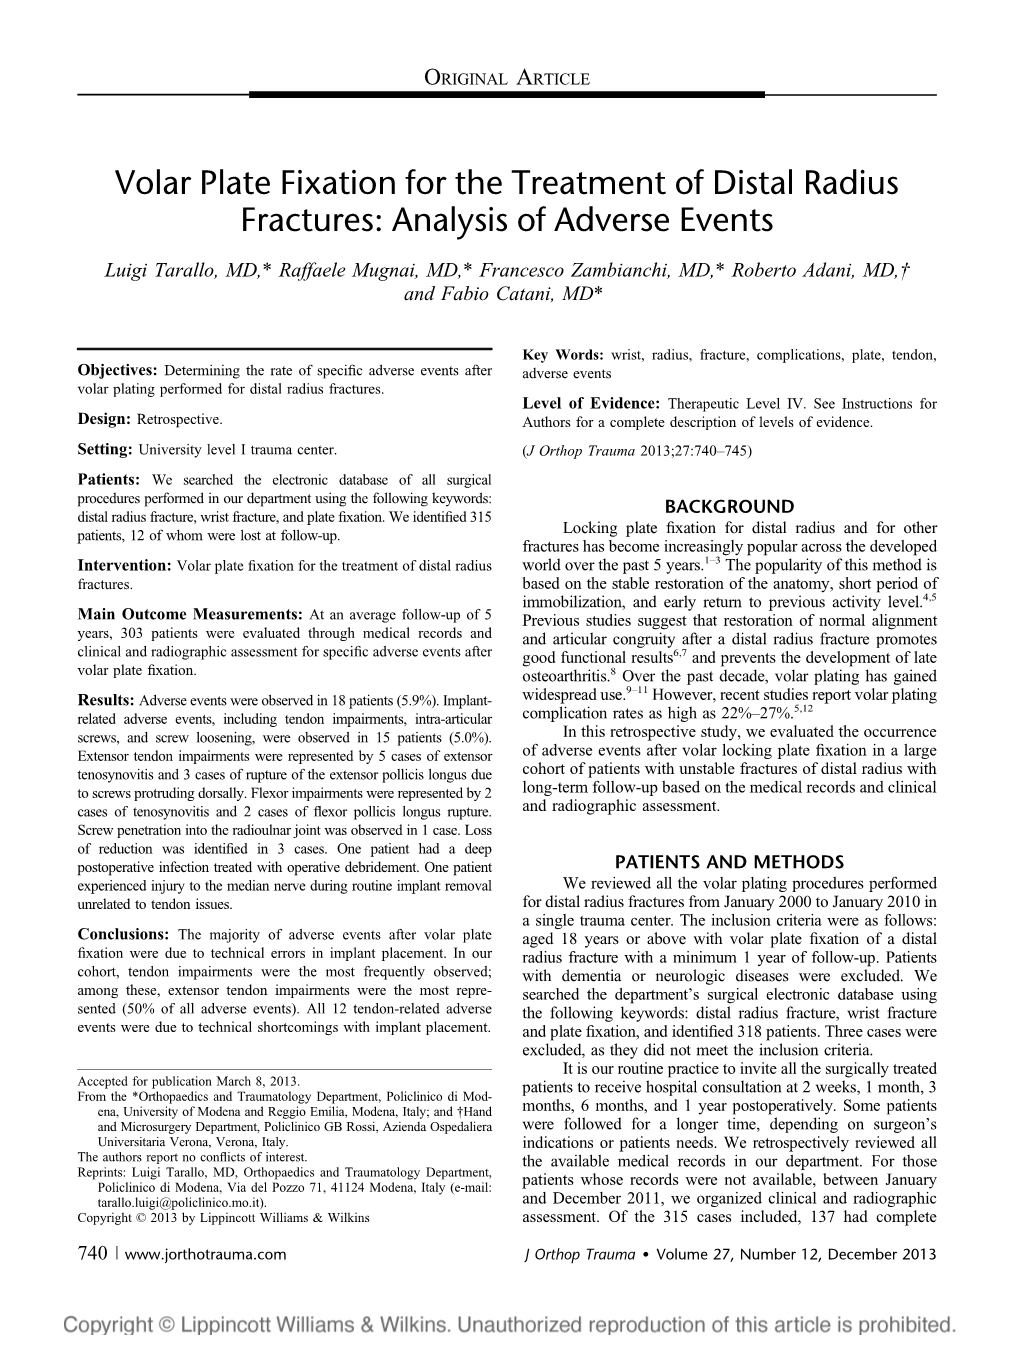 Volar Plate Fixation for the Treatment of Distal Radius Fractures: Analysis of Adverse Events